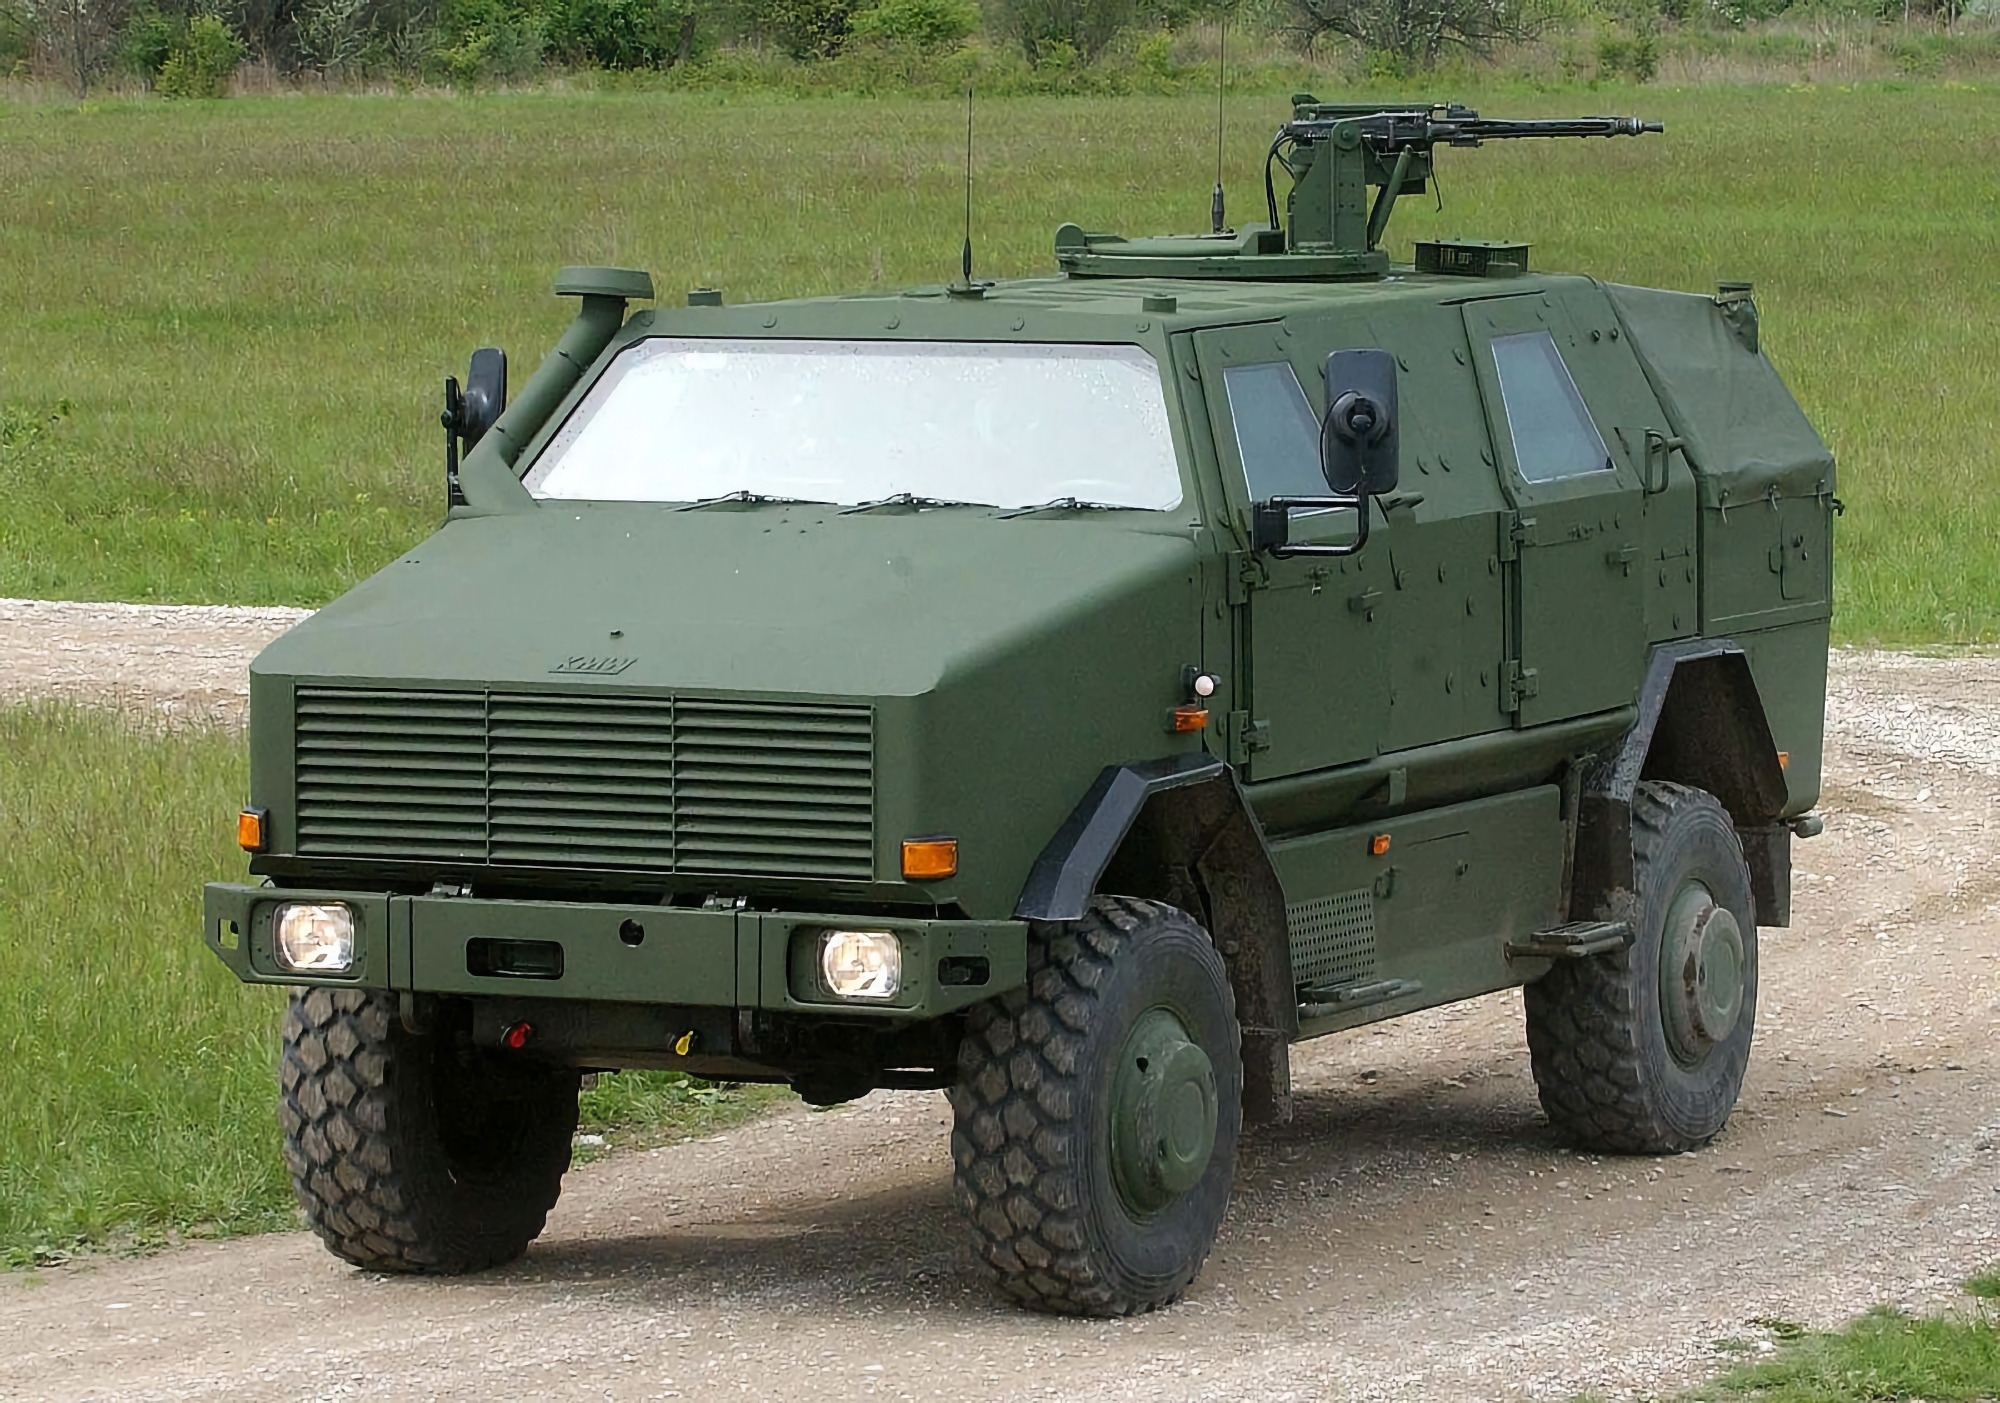 The AFU is already using German Dingo armored vehicles, they have protection against small arms and are not afraid of mines